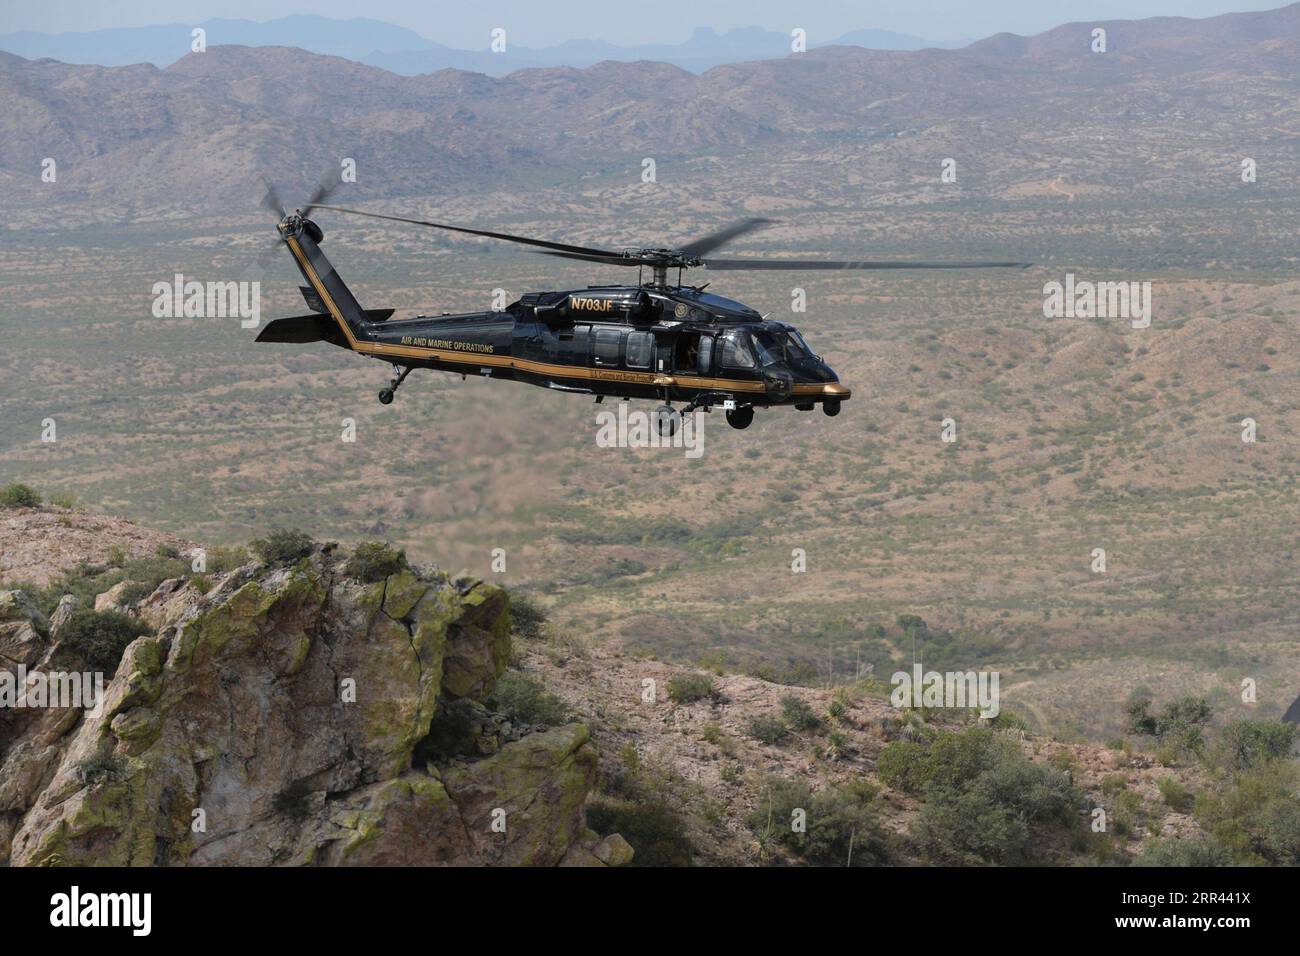 November 2, 2020, Tucson, AZ, United States: U.S. Department of Homeland Security Acting Deputy Secretary Ken Cuccinelli tours a newly constructed section of the Trump Wall by helicopter in the Tucson Sector November 2, 2020 near Tucson, Arizona. Credit Image: /Planet Pix via ZUMA Wire U.S. Deputy Acting Homeland Security Secretary Ken Cuccinelli JerryxGlaser/Dhs PUBLICATIONxNOTxINxCHN Ken.Cuccinelli 20201102 055.jpg Stock Photo